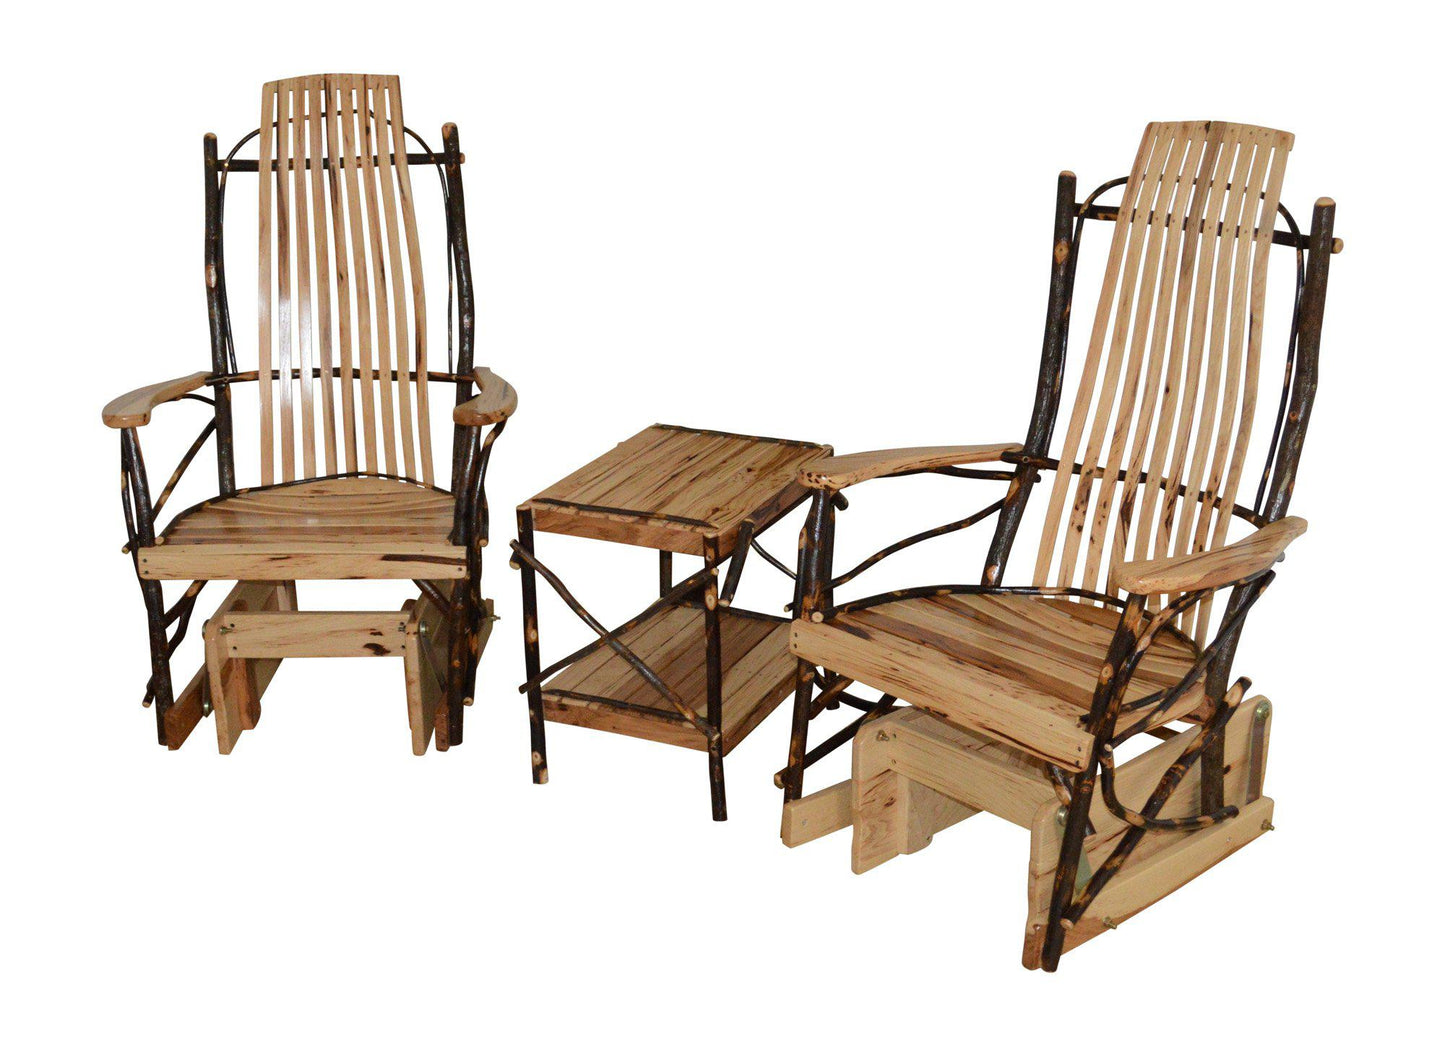 A&L Furniture Co. Amish Bentwood Hickory Glider Rocker 3 Piece Set - LEAD TIME TO SHIP 10 BUSINESS DAYS